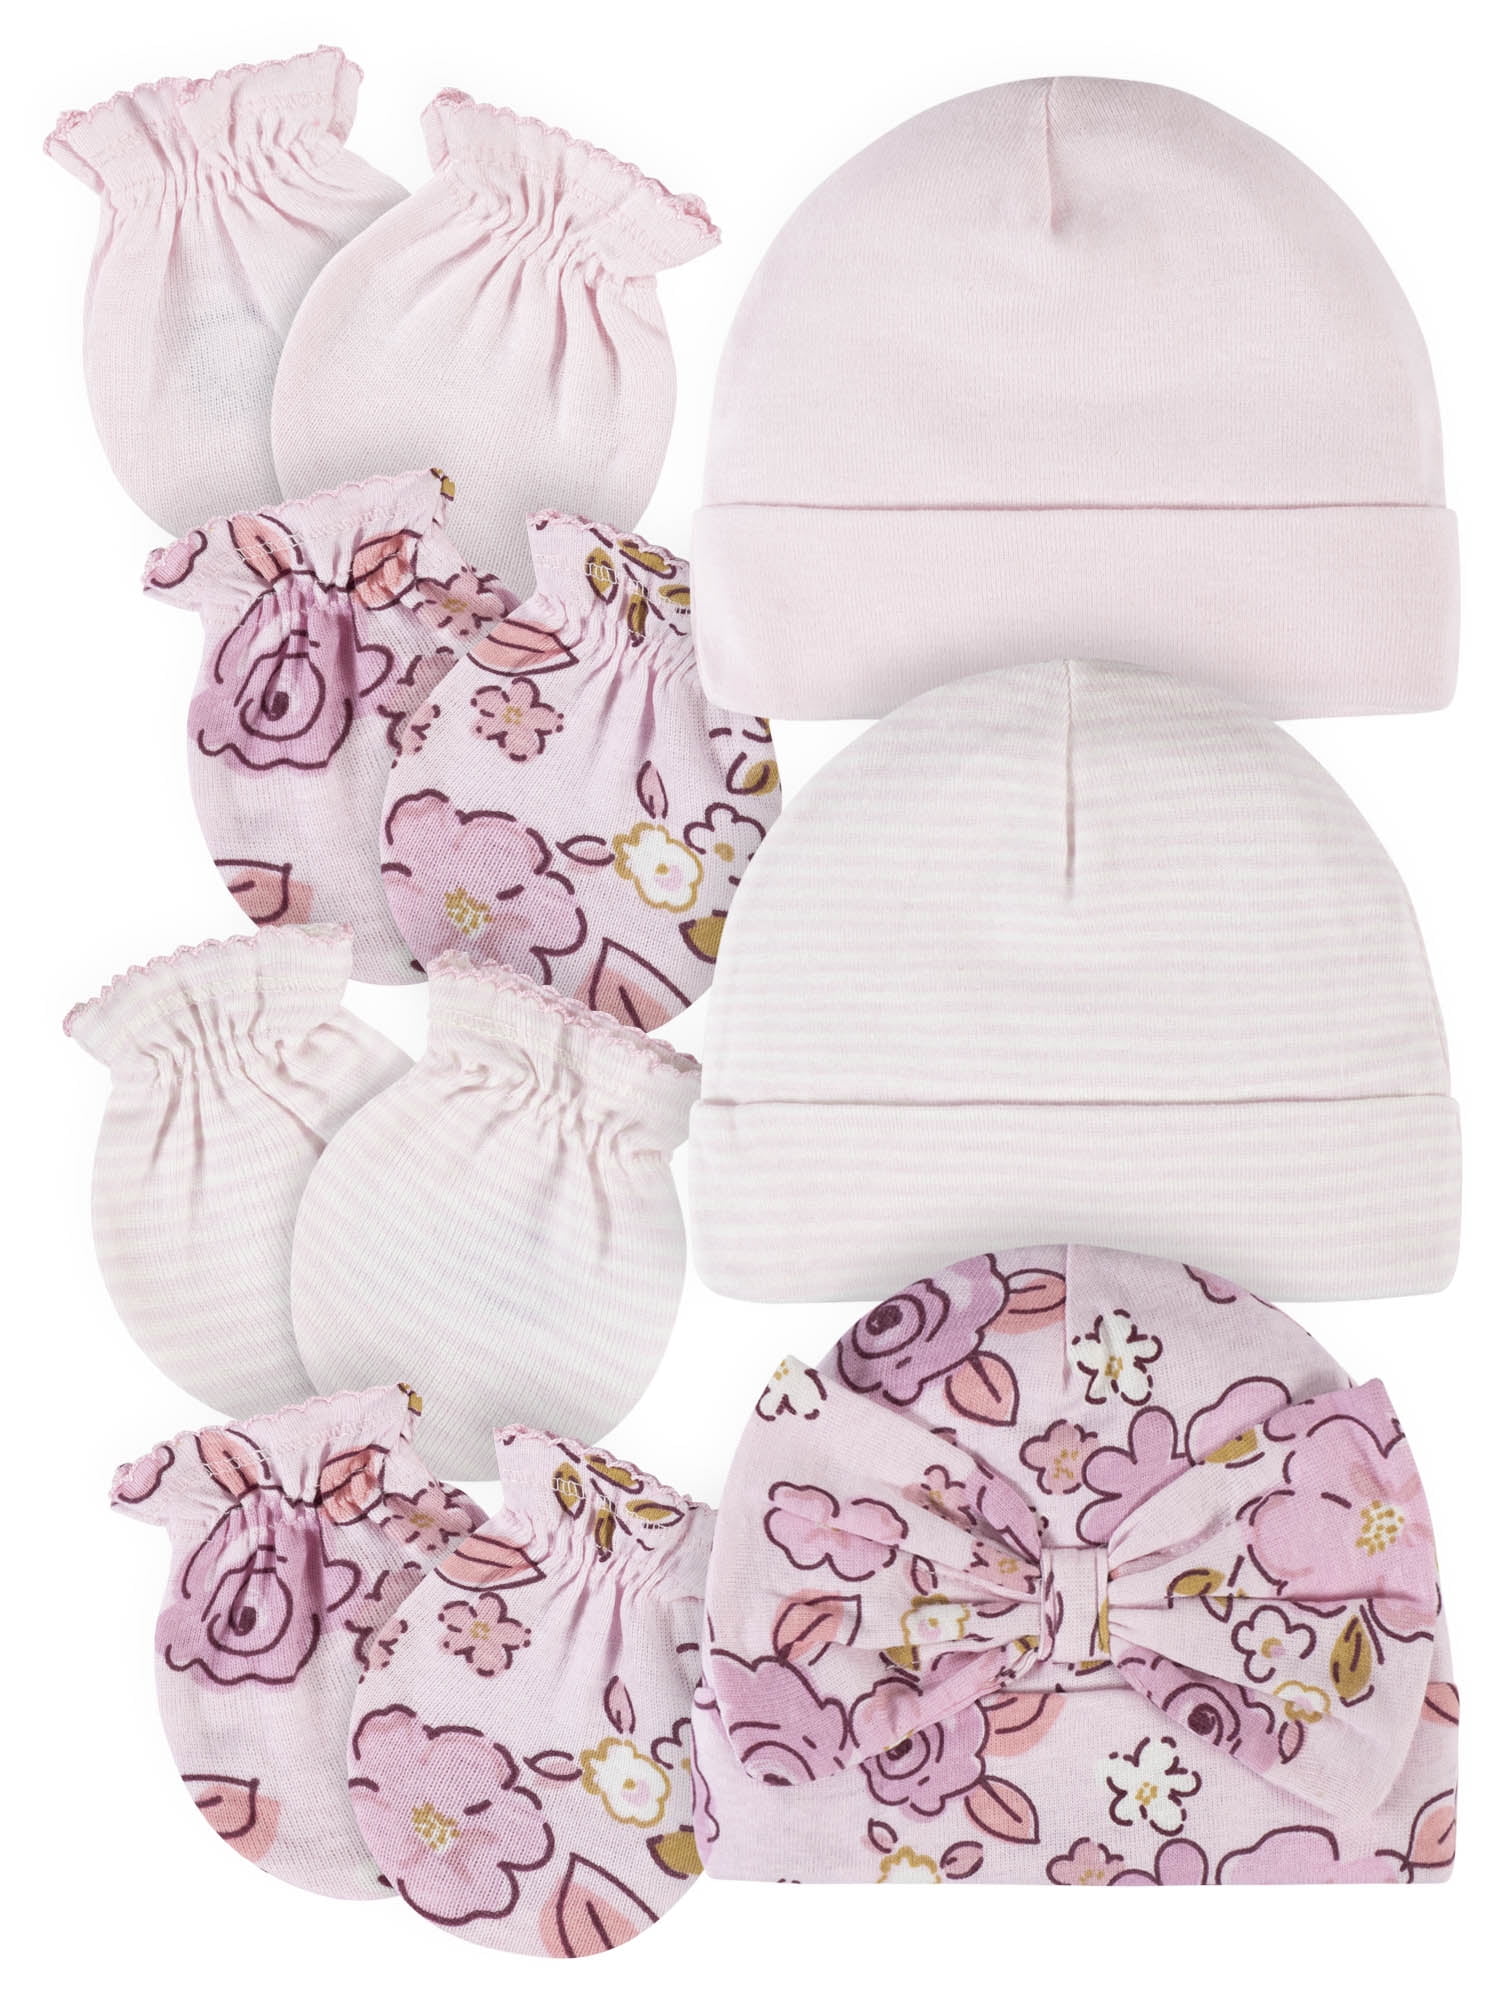 Brand New set Infant Baby Girls 0-3 Month Lot of Gerber Hats/caps & Mittens 